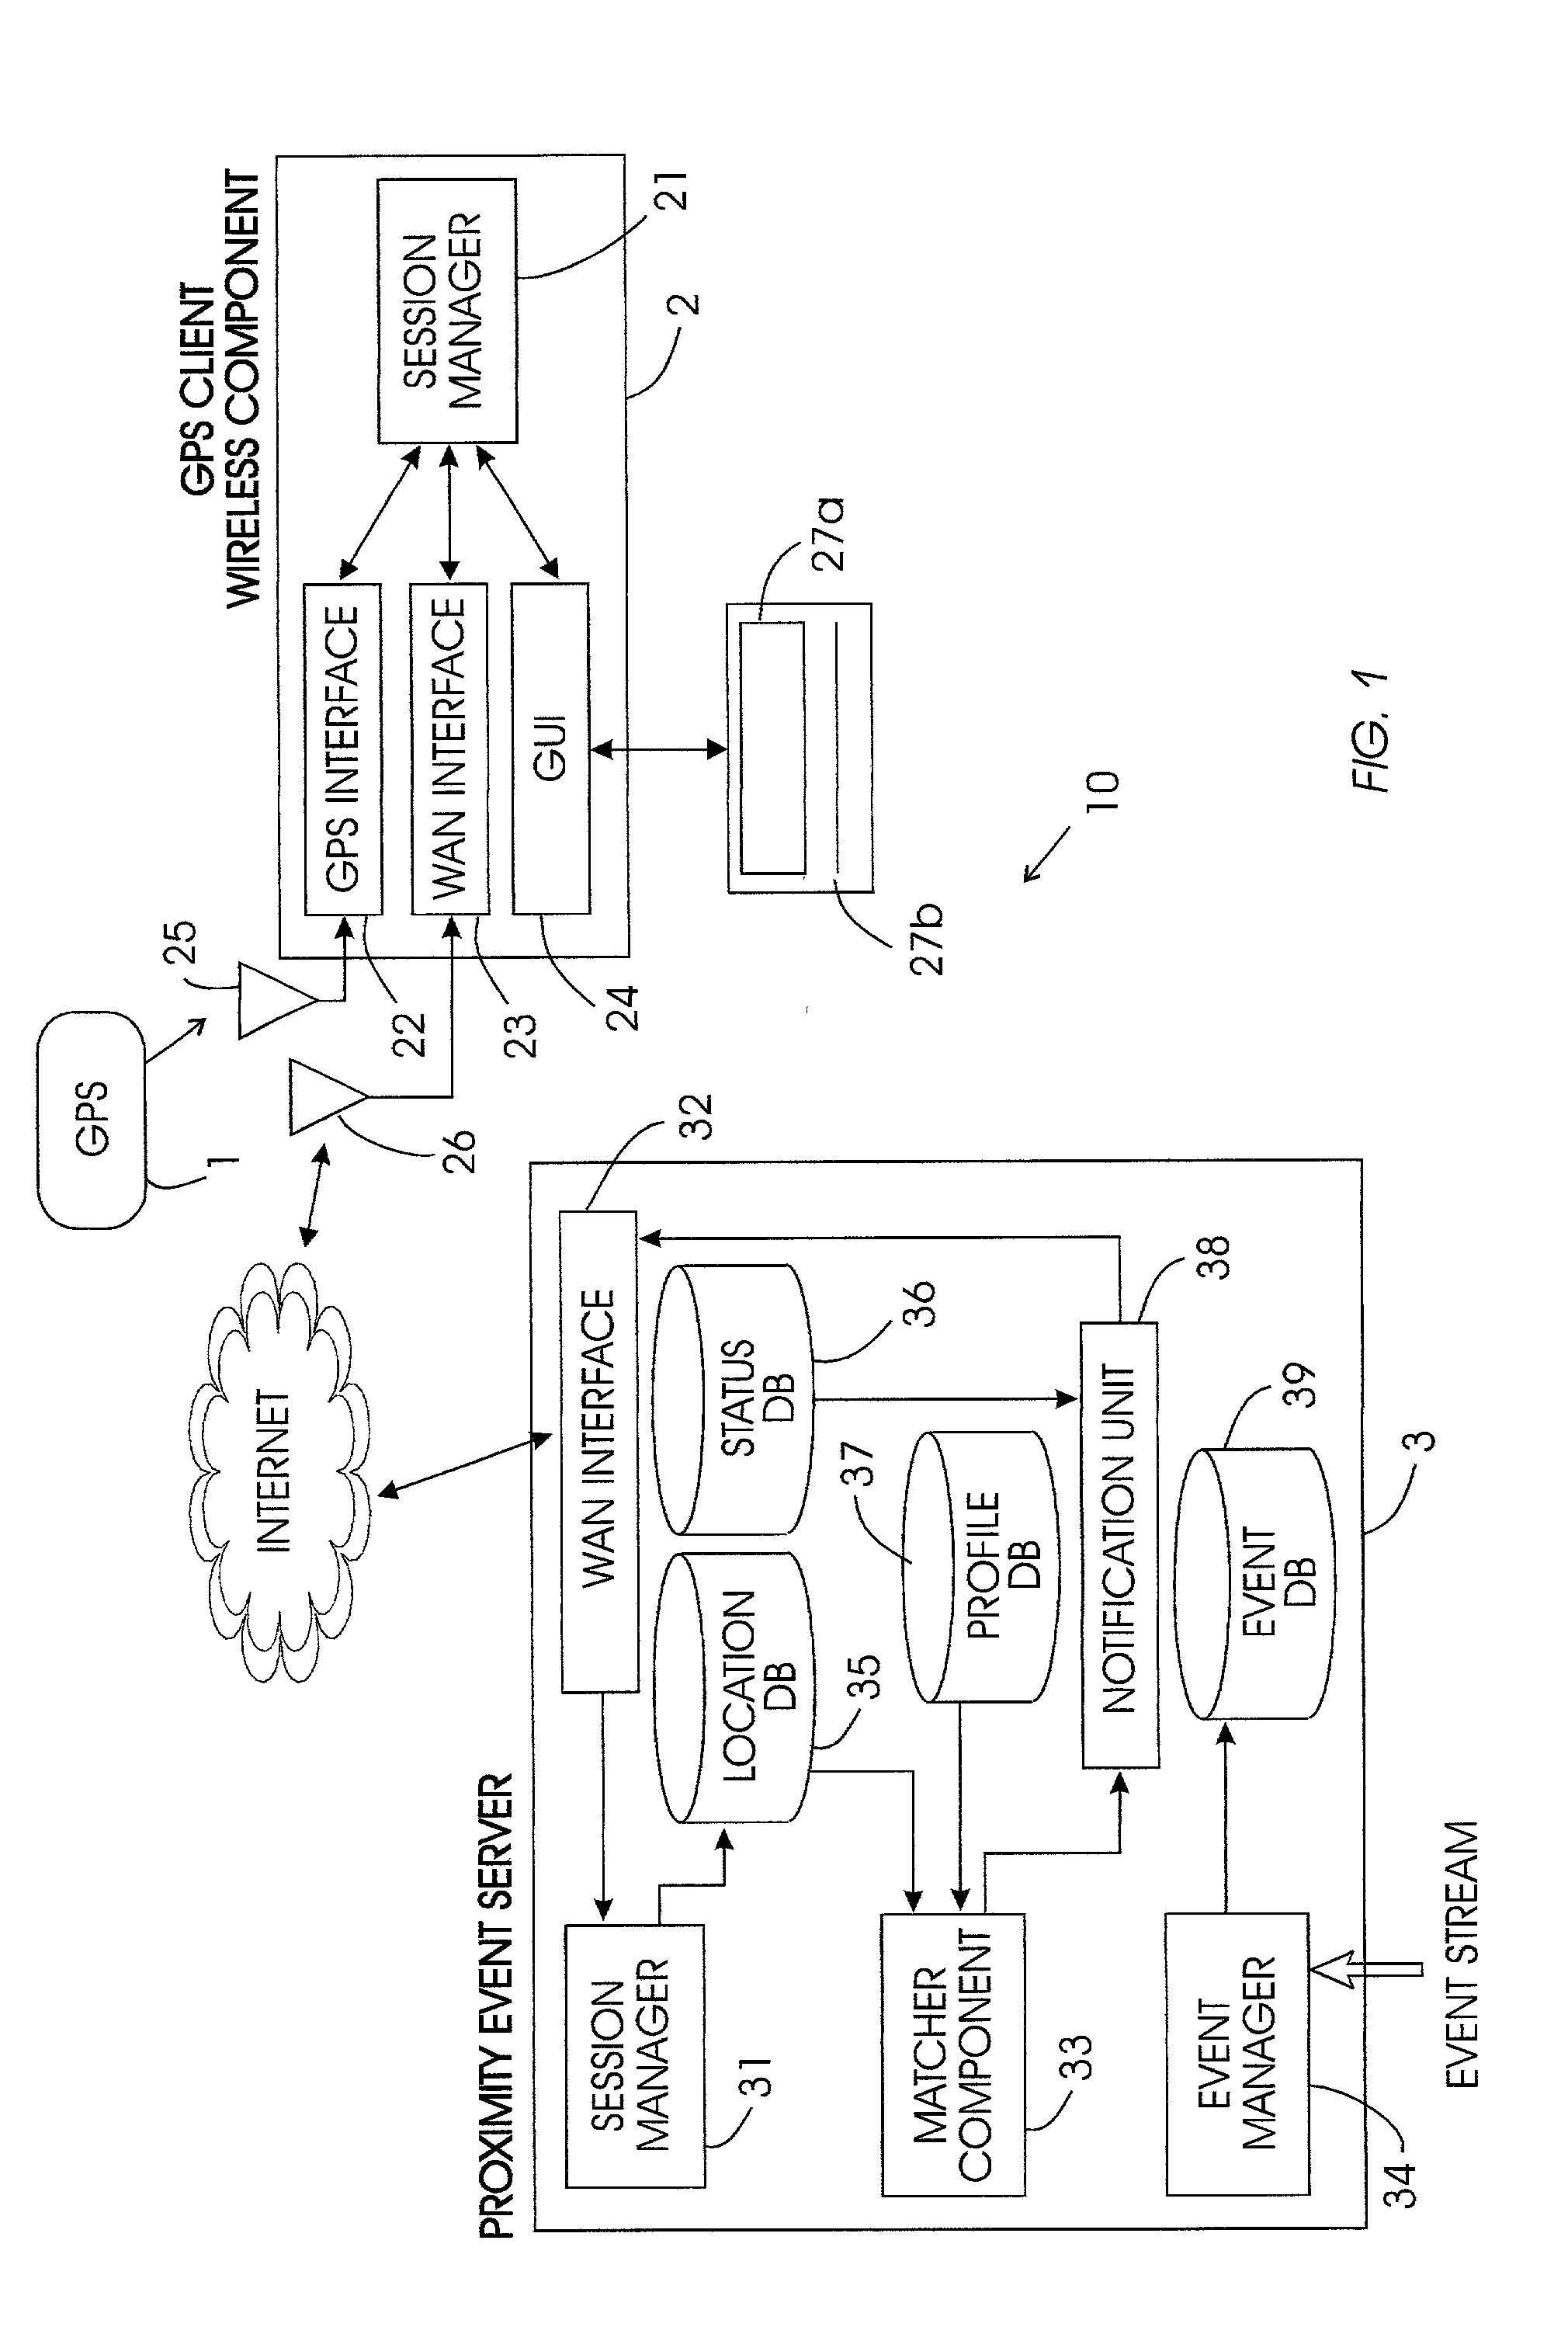 Wireless communication system and method to provide geo-spatial related event data